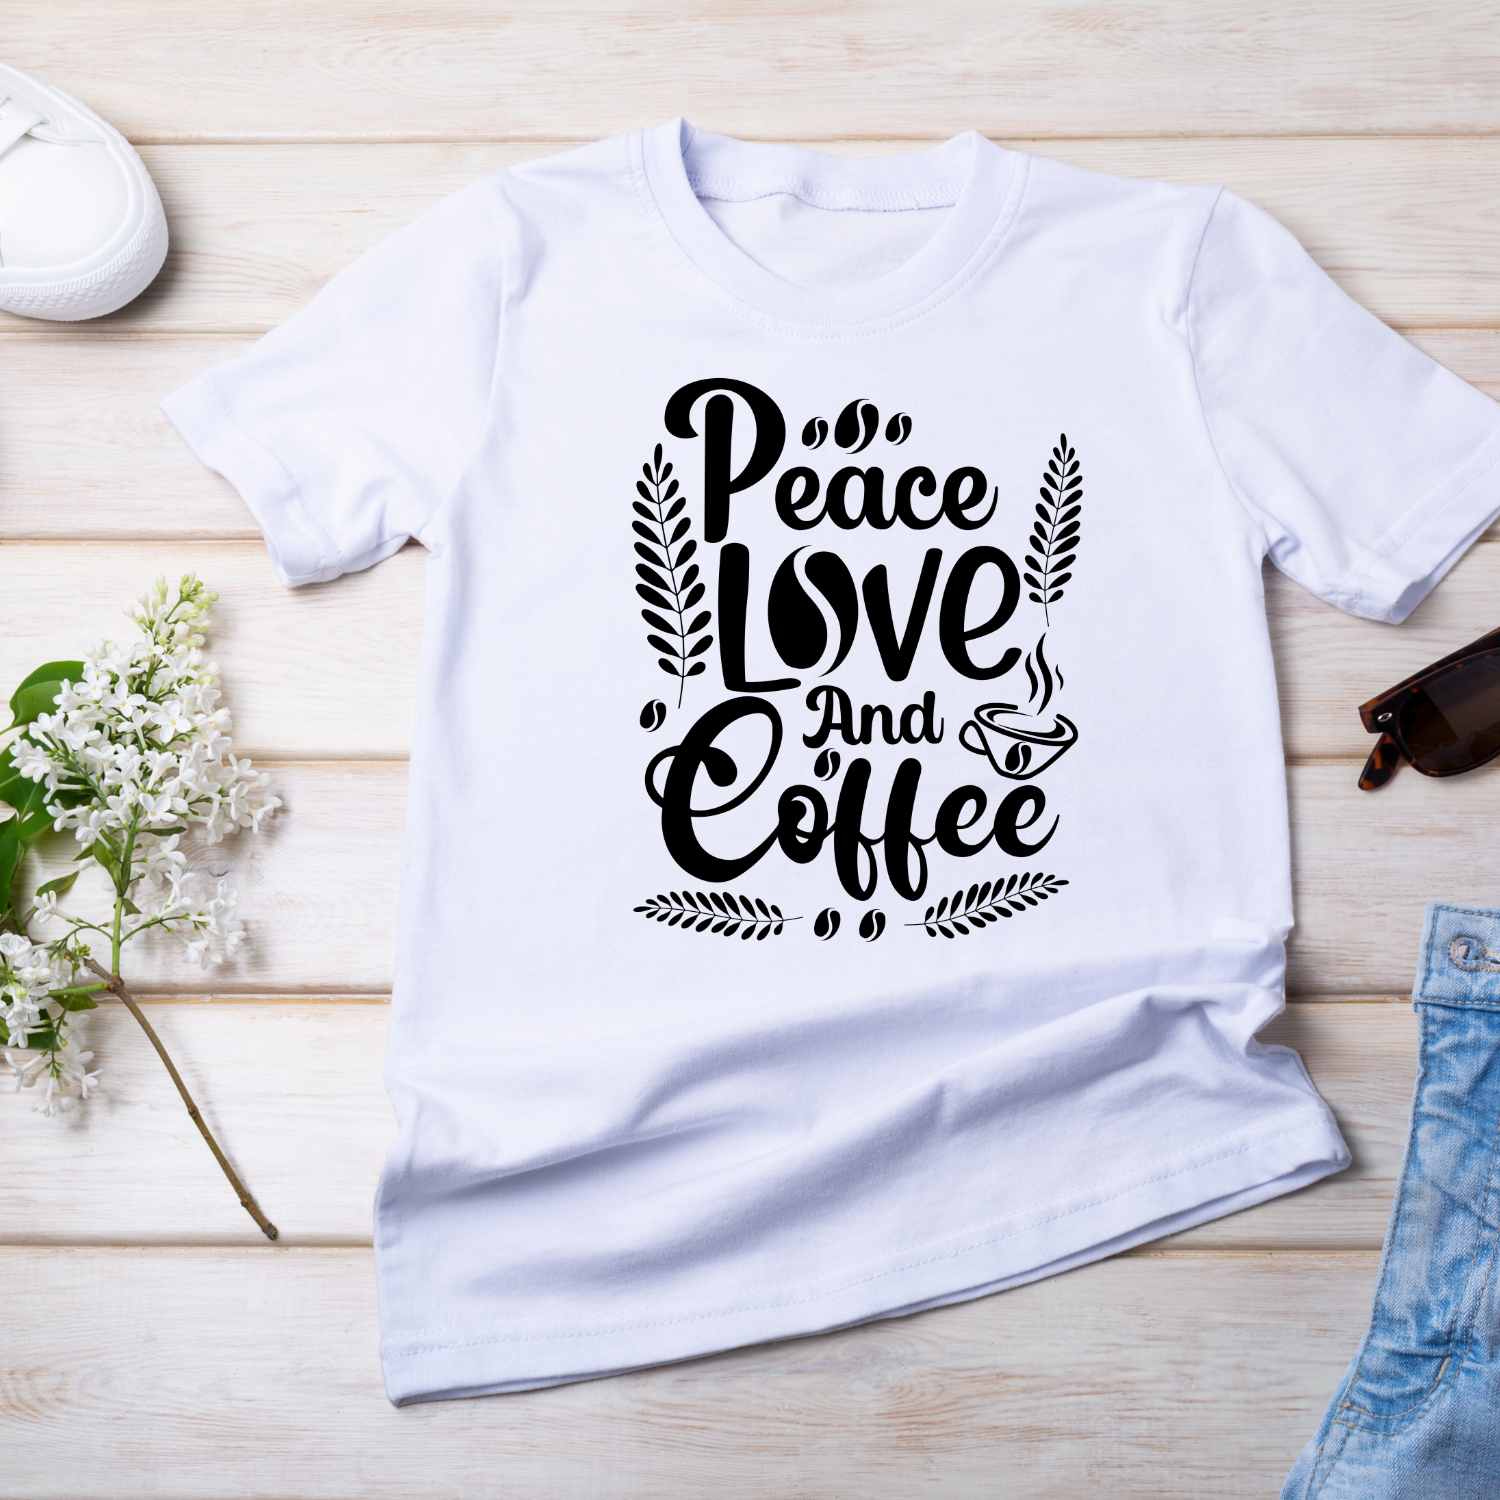 Peace, Love and coffee T-shirt Design